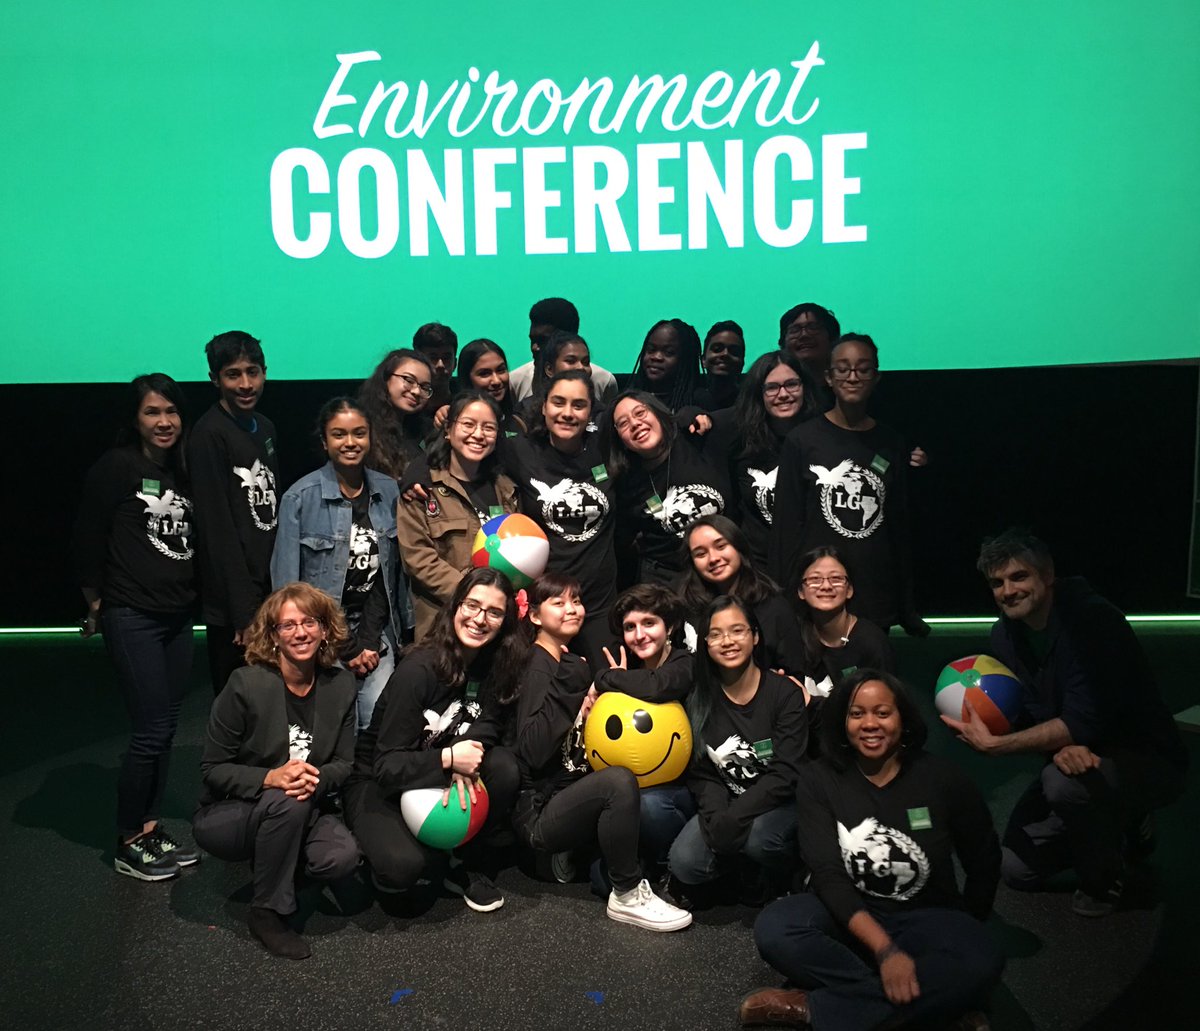 And that's a wrap! So proud of you @GreenTeamFLCHS for all of your work and dedication! @LibermannCHS @TCDSB #TCDSBstewards #environment #stewardsoftheearth